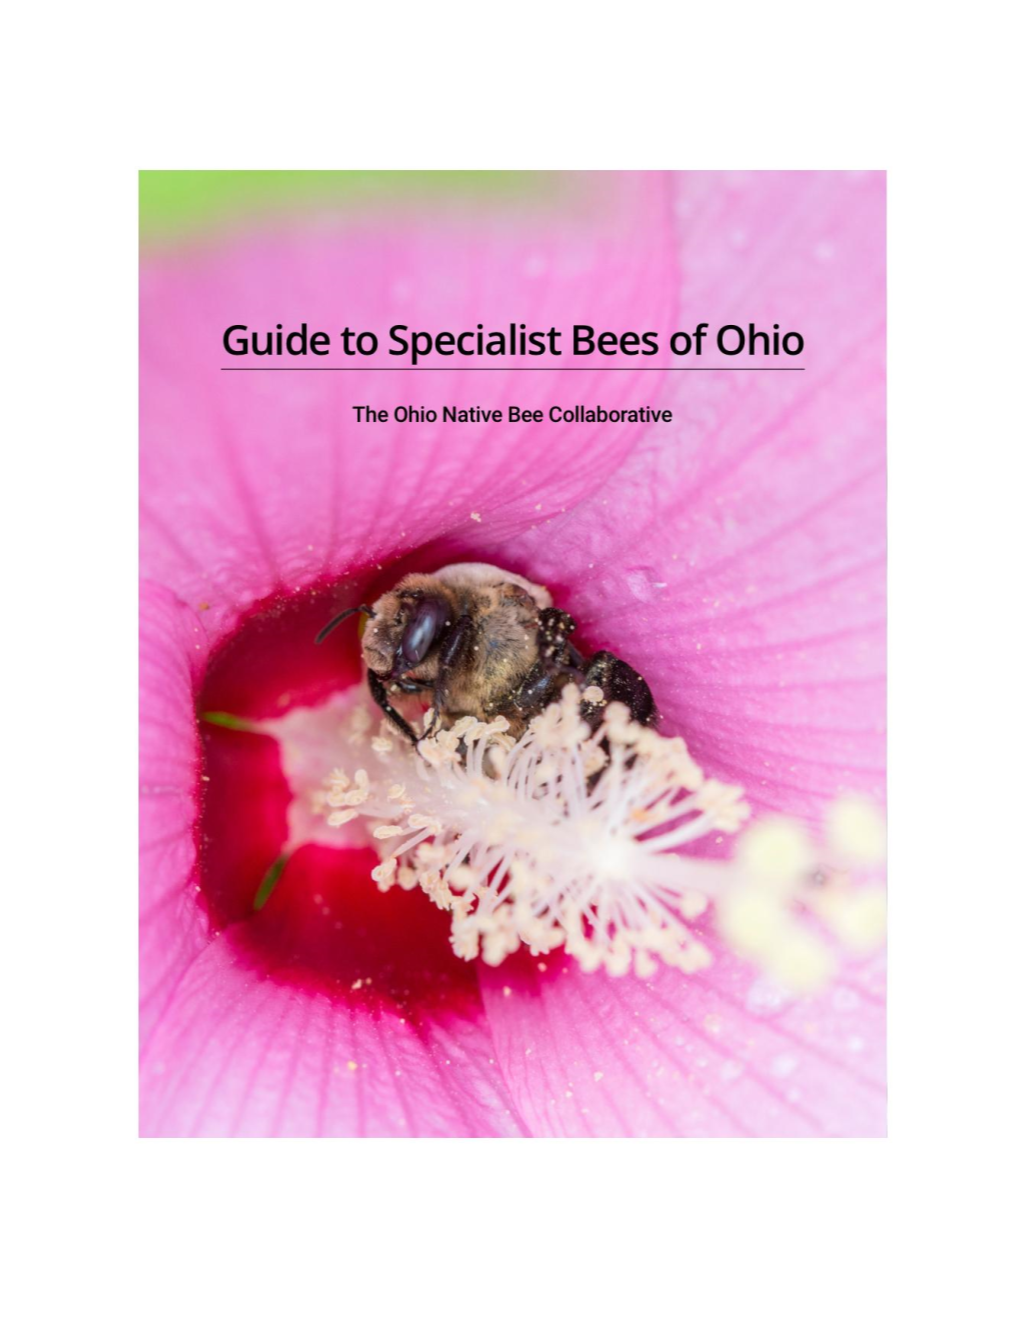 Guide to Specialist Bees of Ohio (Version 1.0.0, 2021) Was Developed by the Ohio Native Bee Collaborative